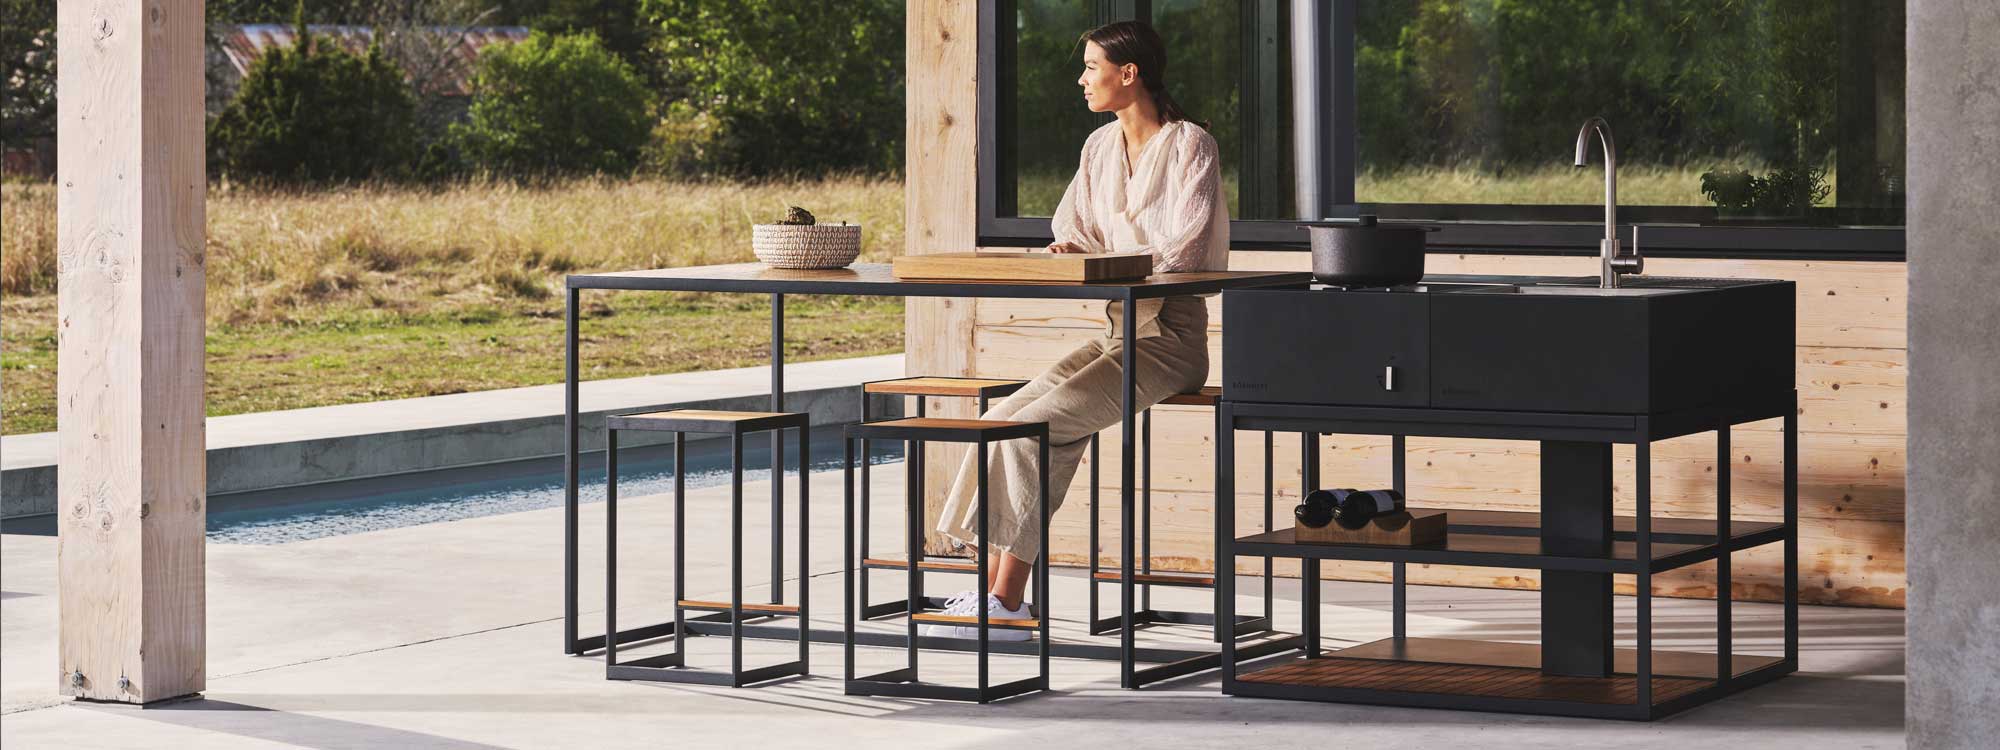 Image of woman sat at Open Bistro outdoor kitchen furniture next to Open Kitchen outdoor bbq and sink by Roshults, shown on minimalist garden terrace